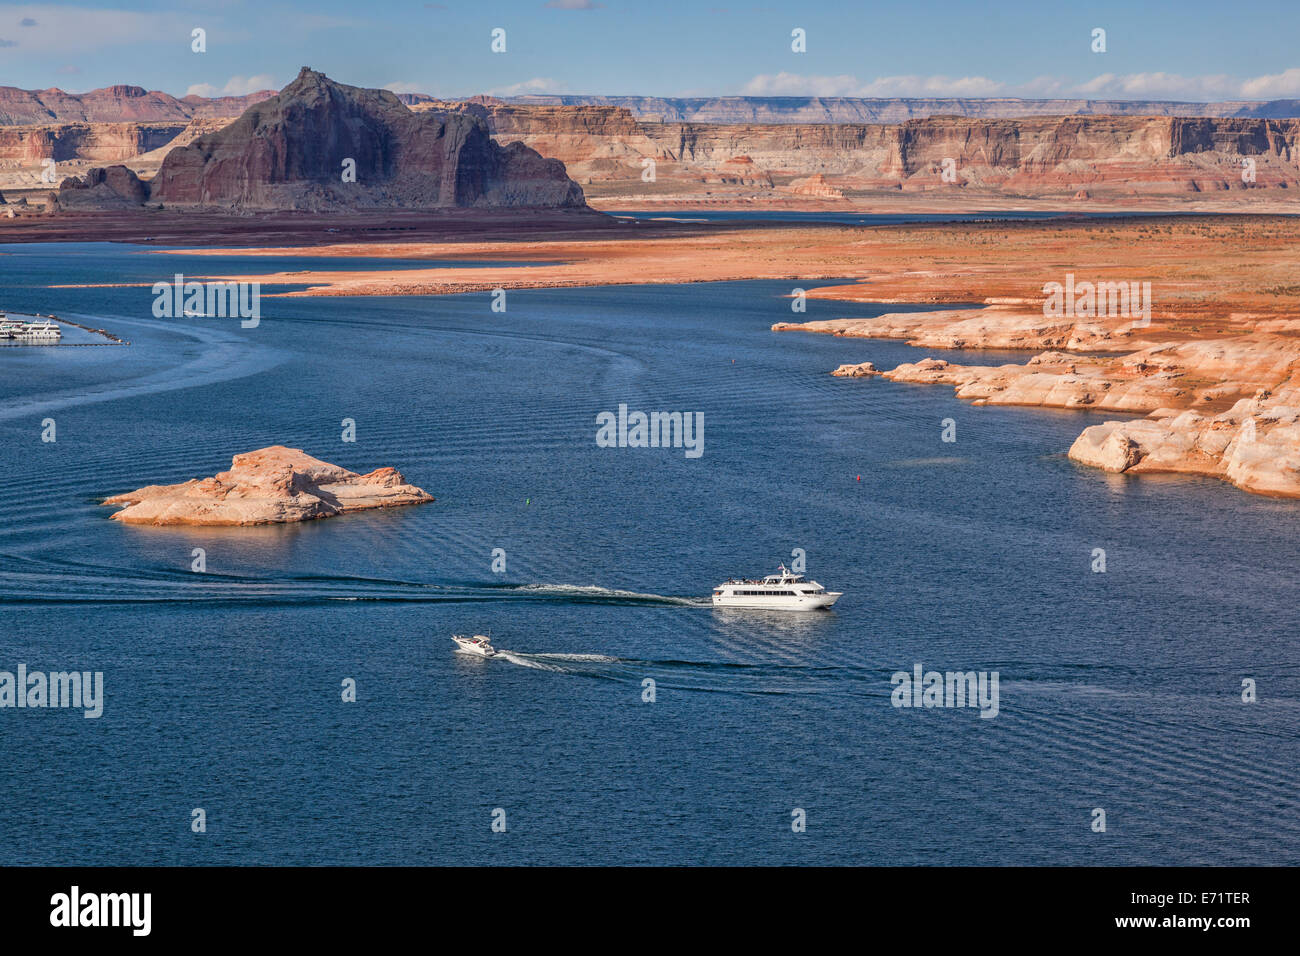 Lake Powell, Arizona, USA, with a couple of boats. The lake is a reservoir produced by damning the Colorado River. Stock Photo